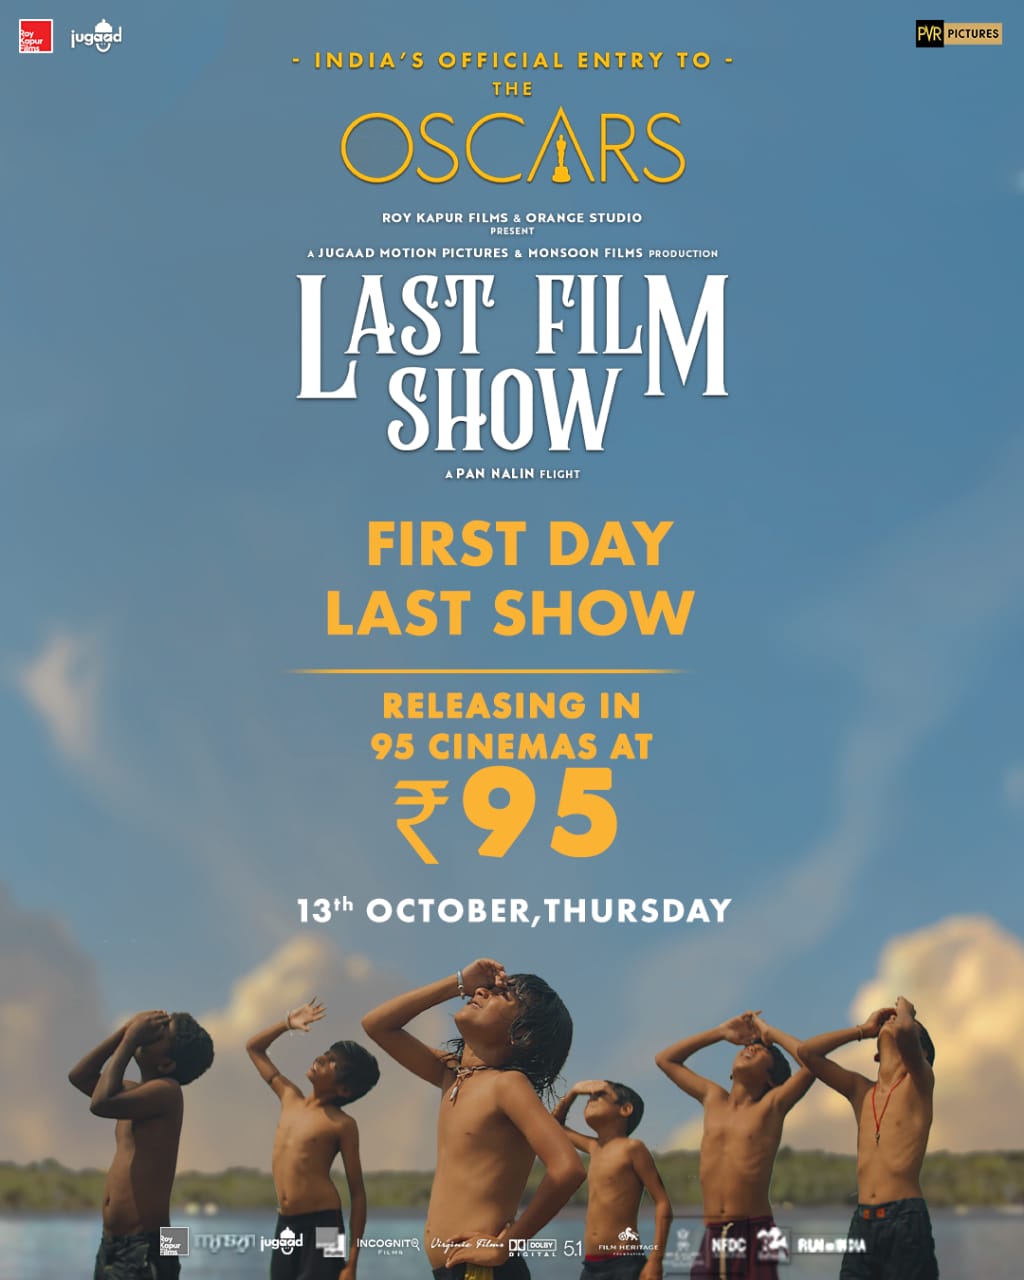 Rs. 95 ticket price across 95 cinemas for 95th Oscars – Last Film Show (Chhello Show) to now release on Last Shows of Thursday, 13th October